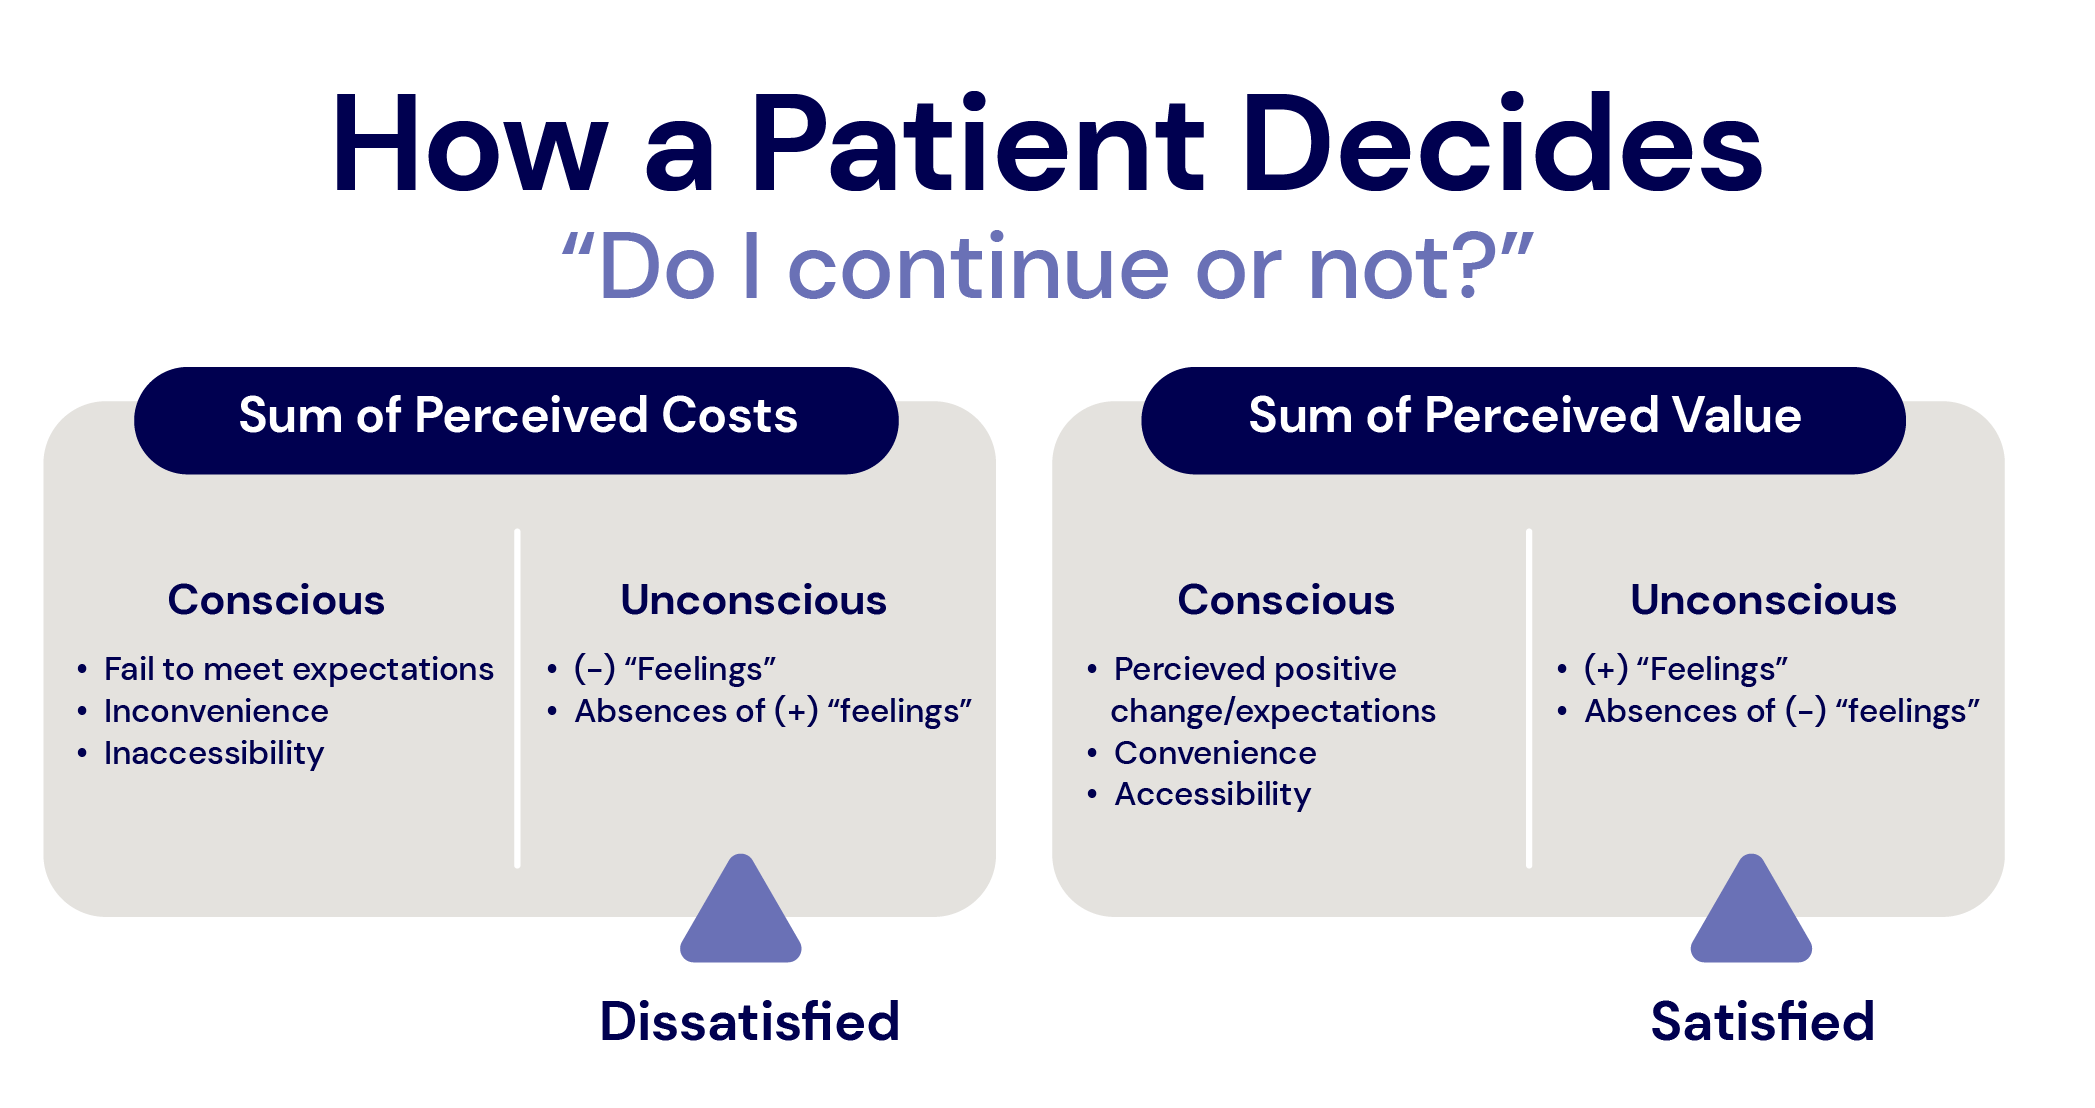 A patient must decide to continue care by weighing the costs and value of their care. 